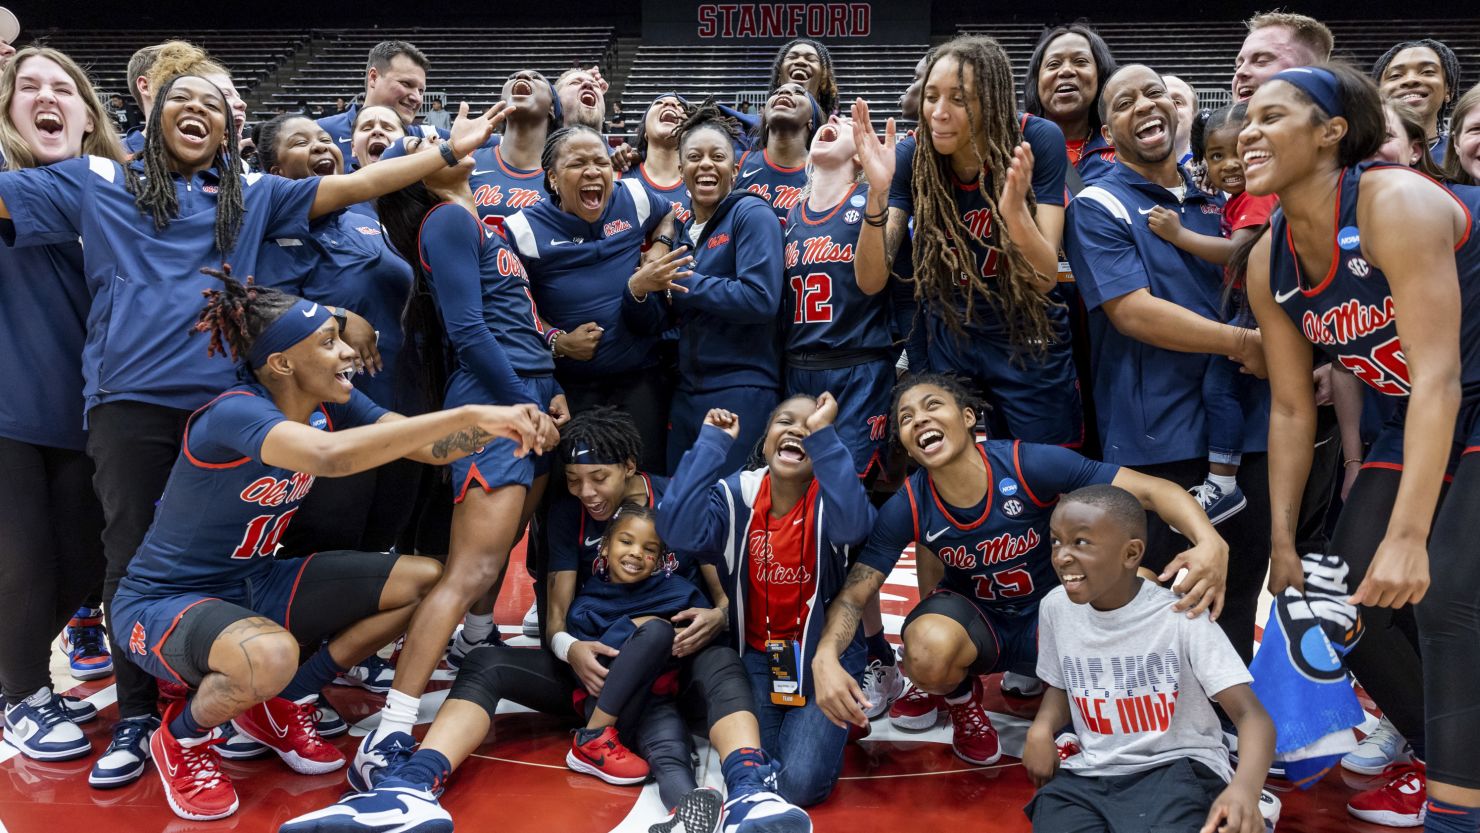 Ole Miss Rebels players celebrate their win against the Stanford Cardinal in the second round of the NCAA women's tournament.